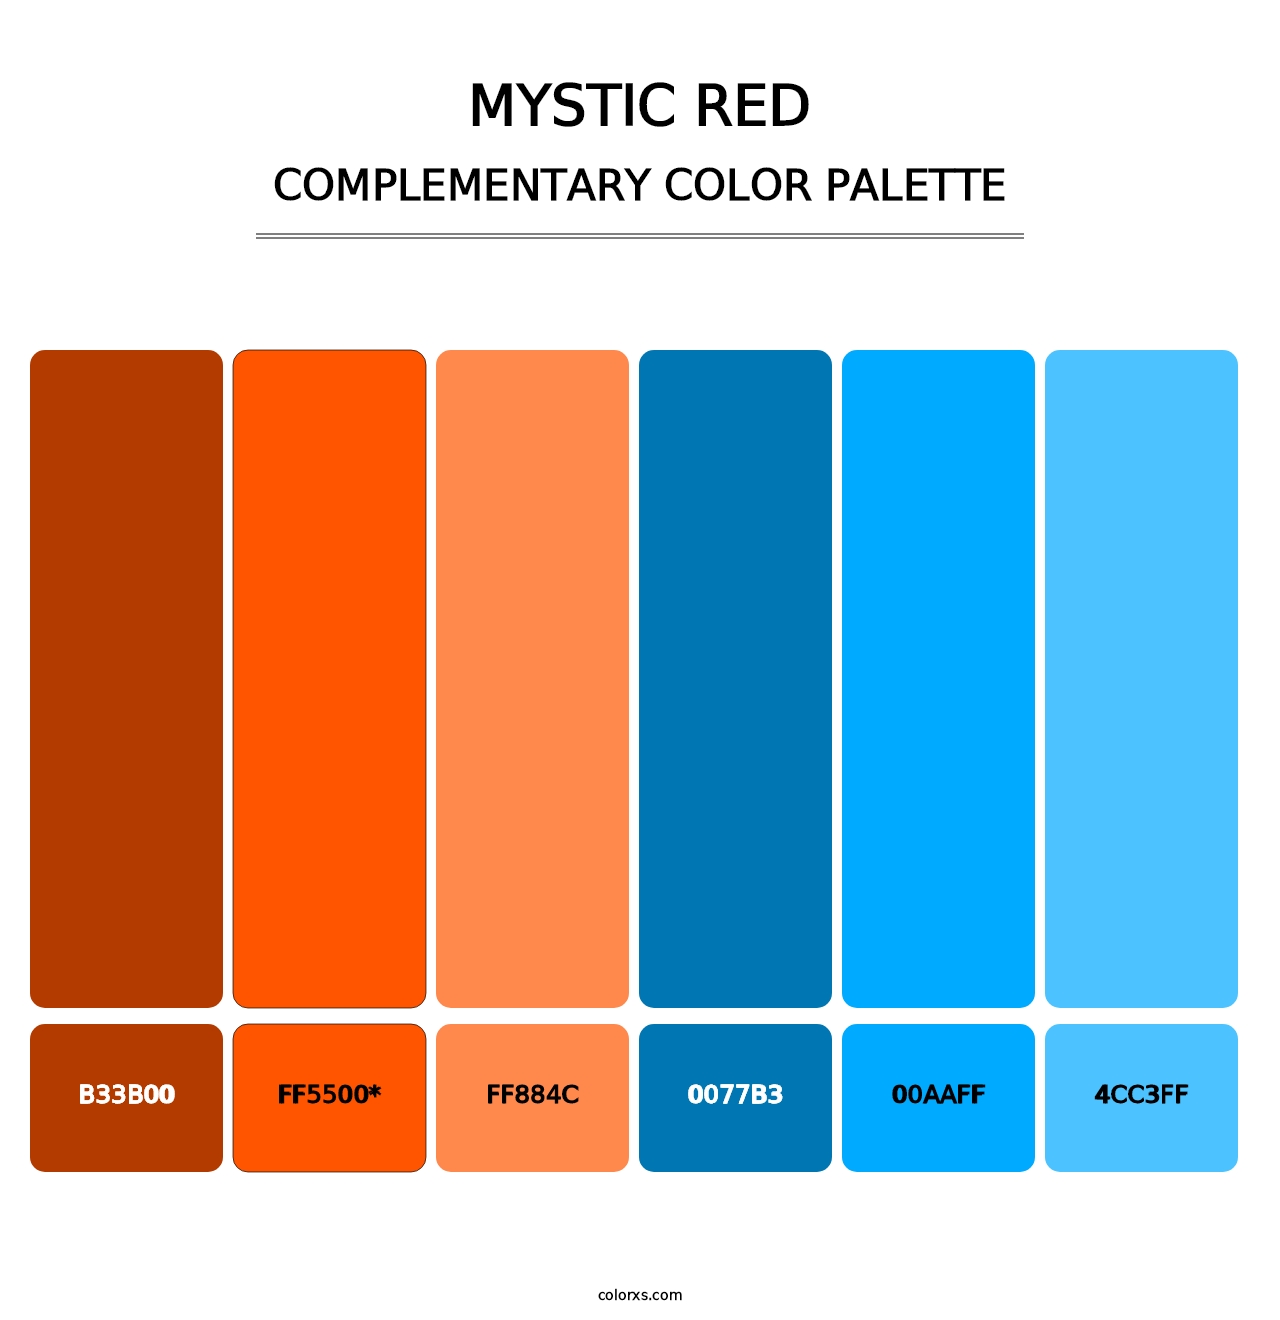 Mystic Red - Complementary Color Palette